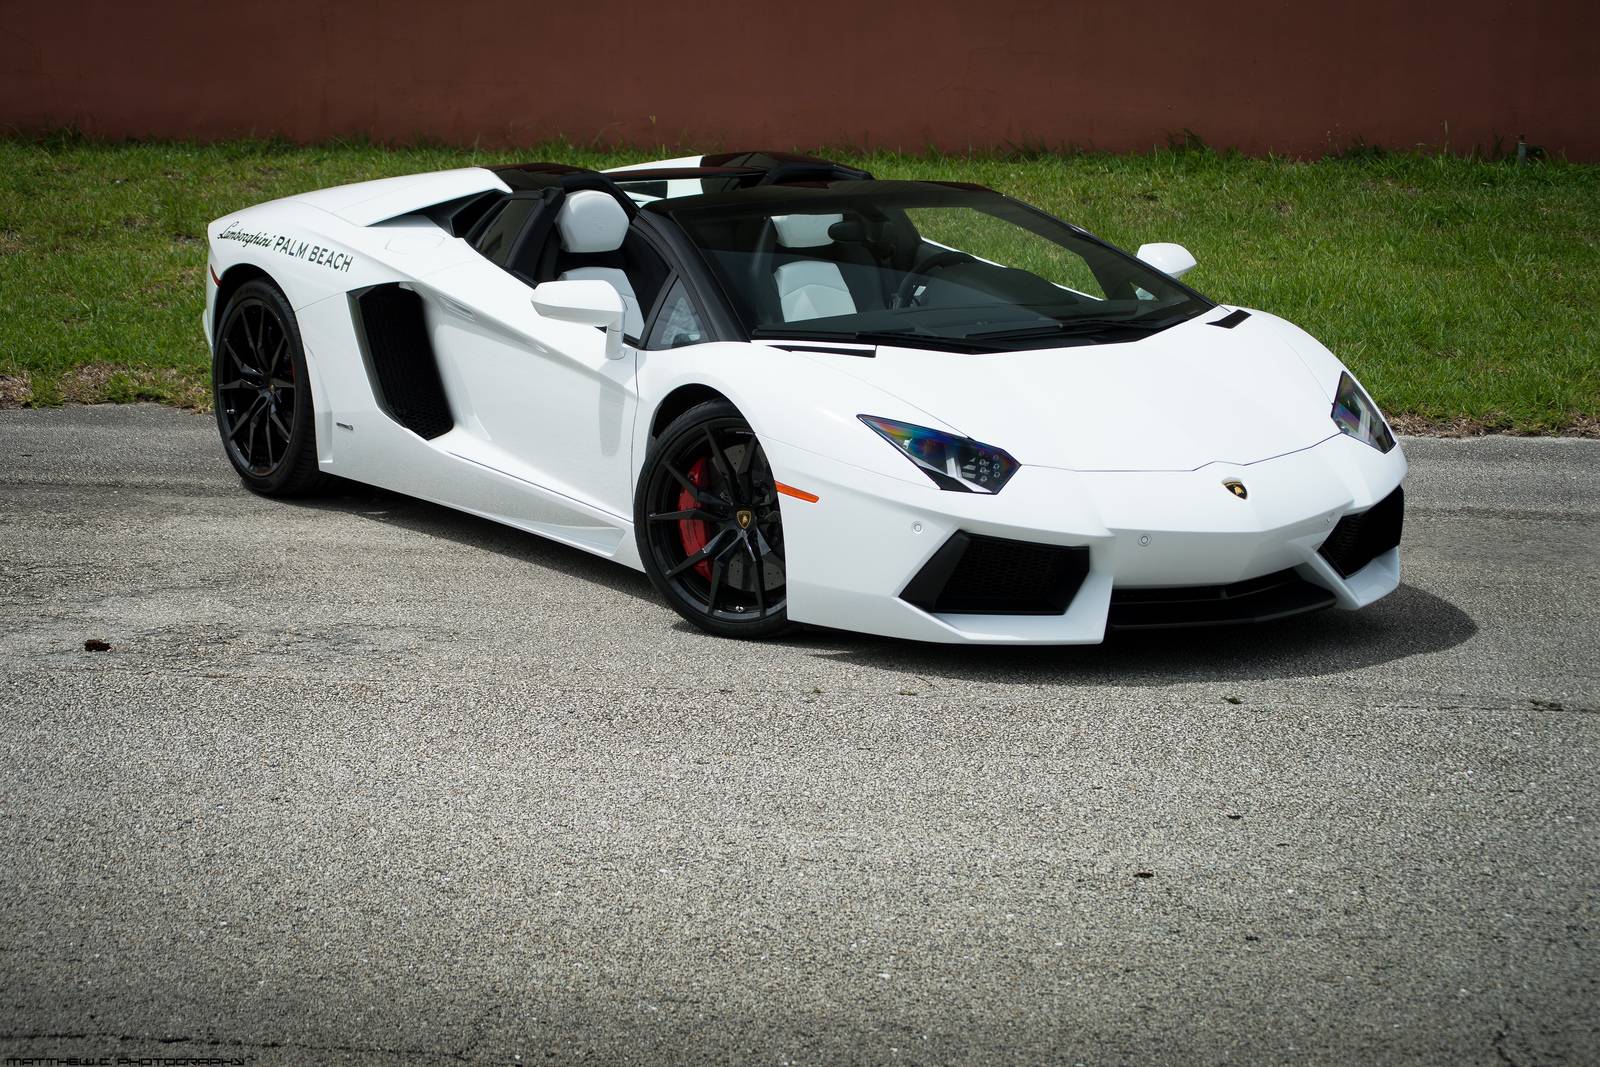 Lamborghini Aventador Wallpapers HD A6 White - lamborghini aventador desktop sports cars, race cars, luxury cars, expensive cars, wallpapers pictures images free download